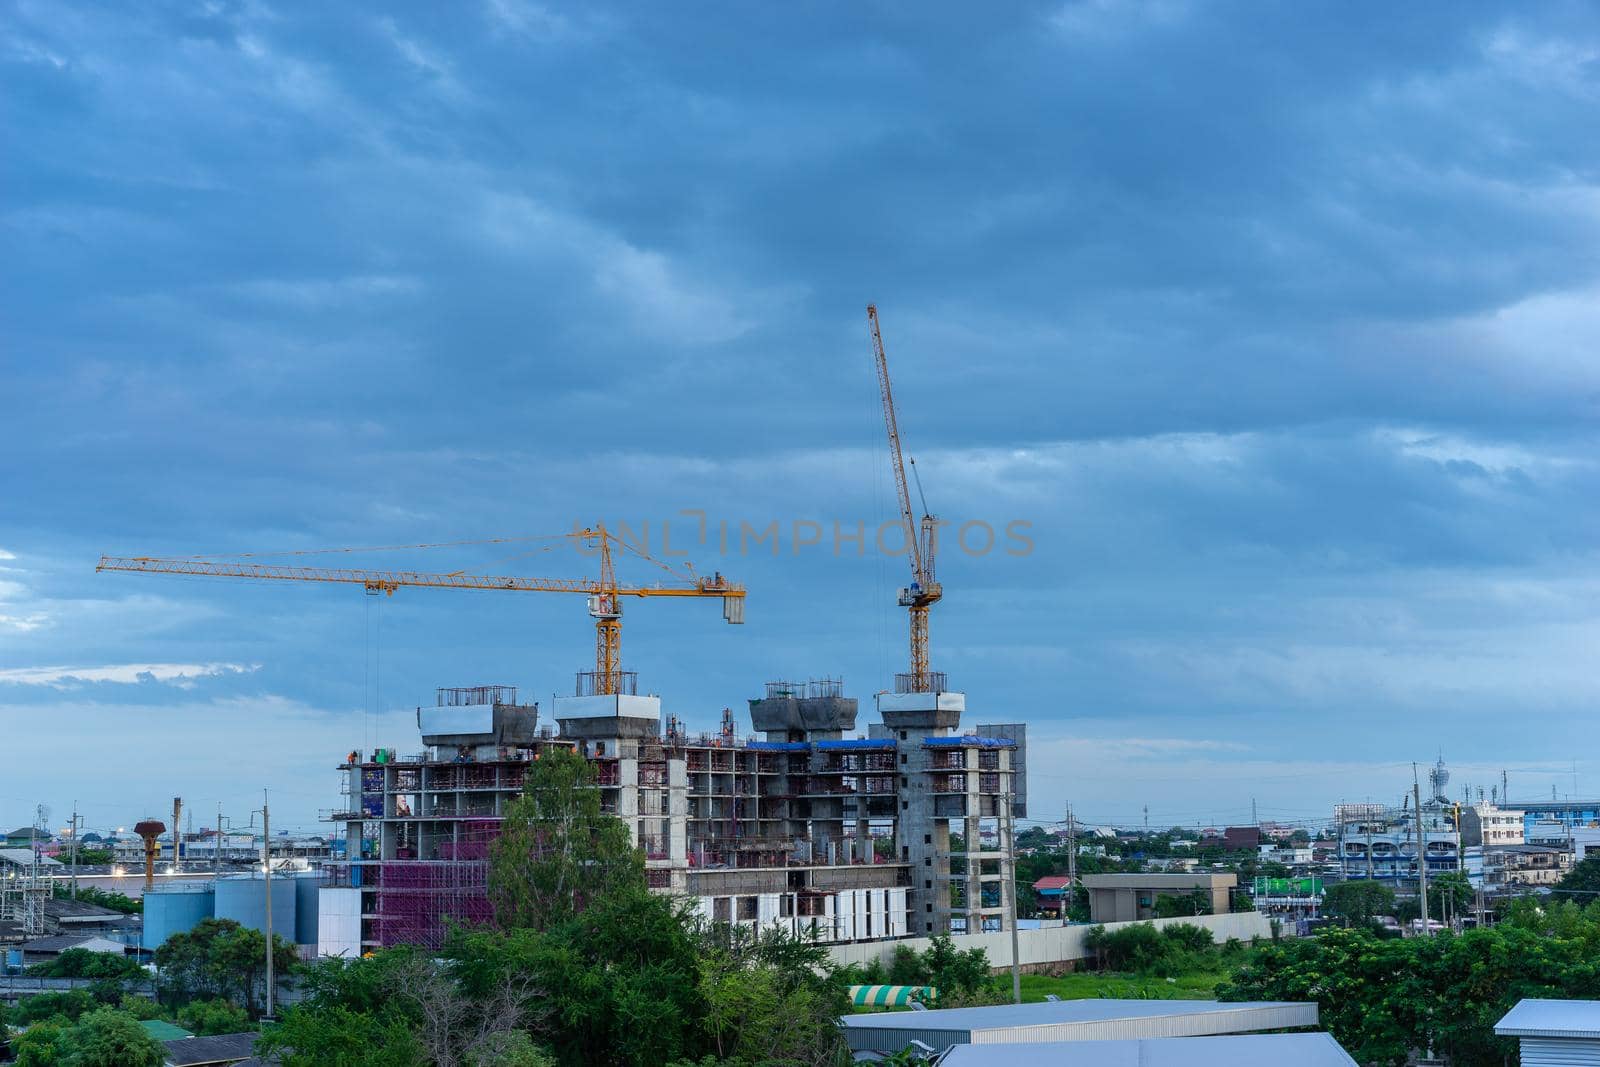 Construction site with cranes in the evening